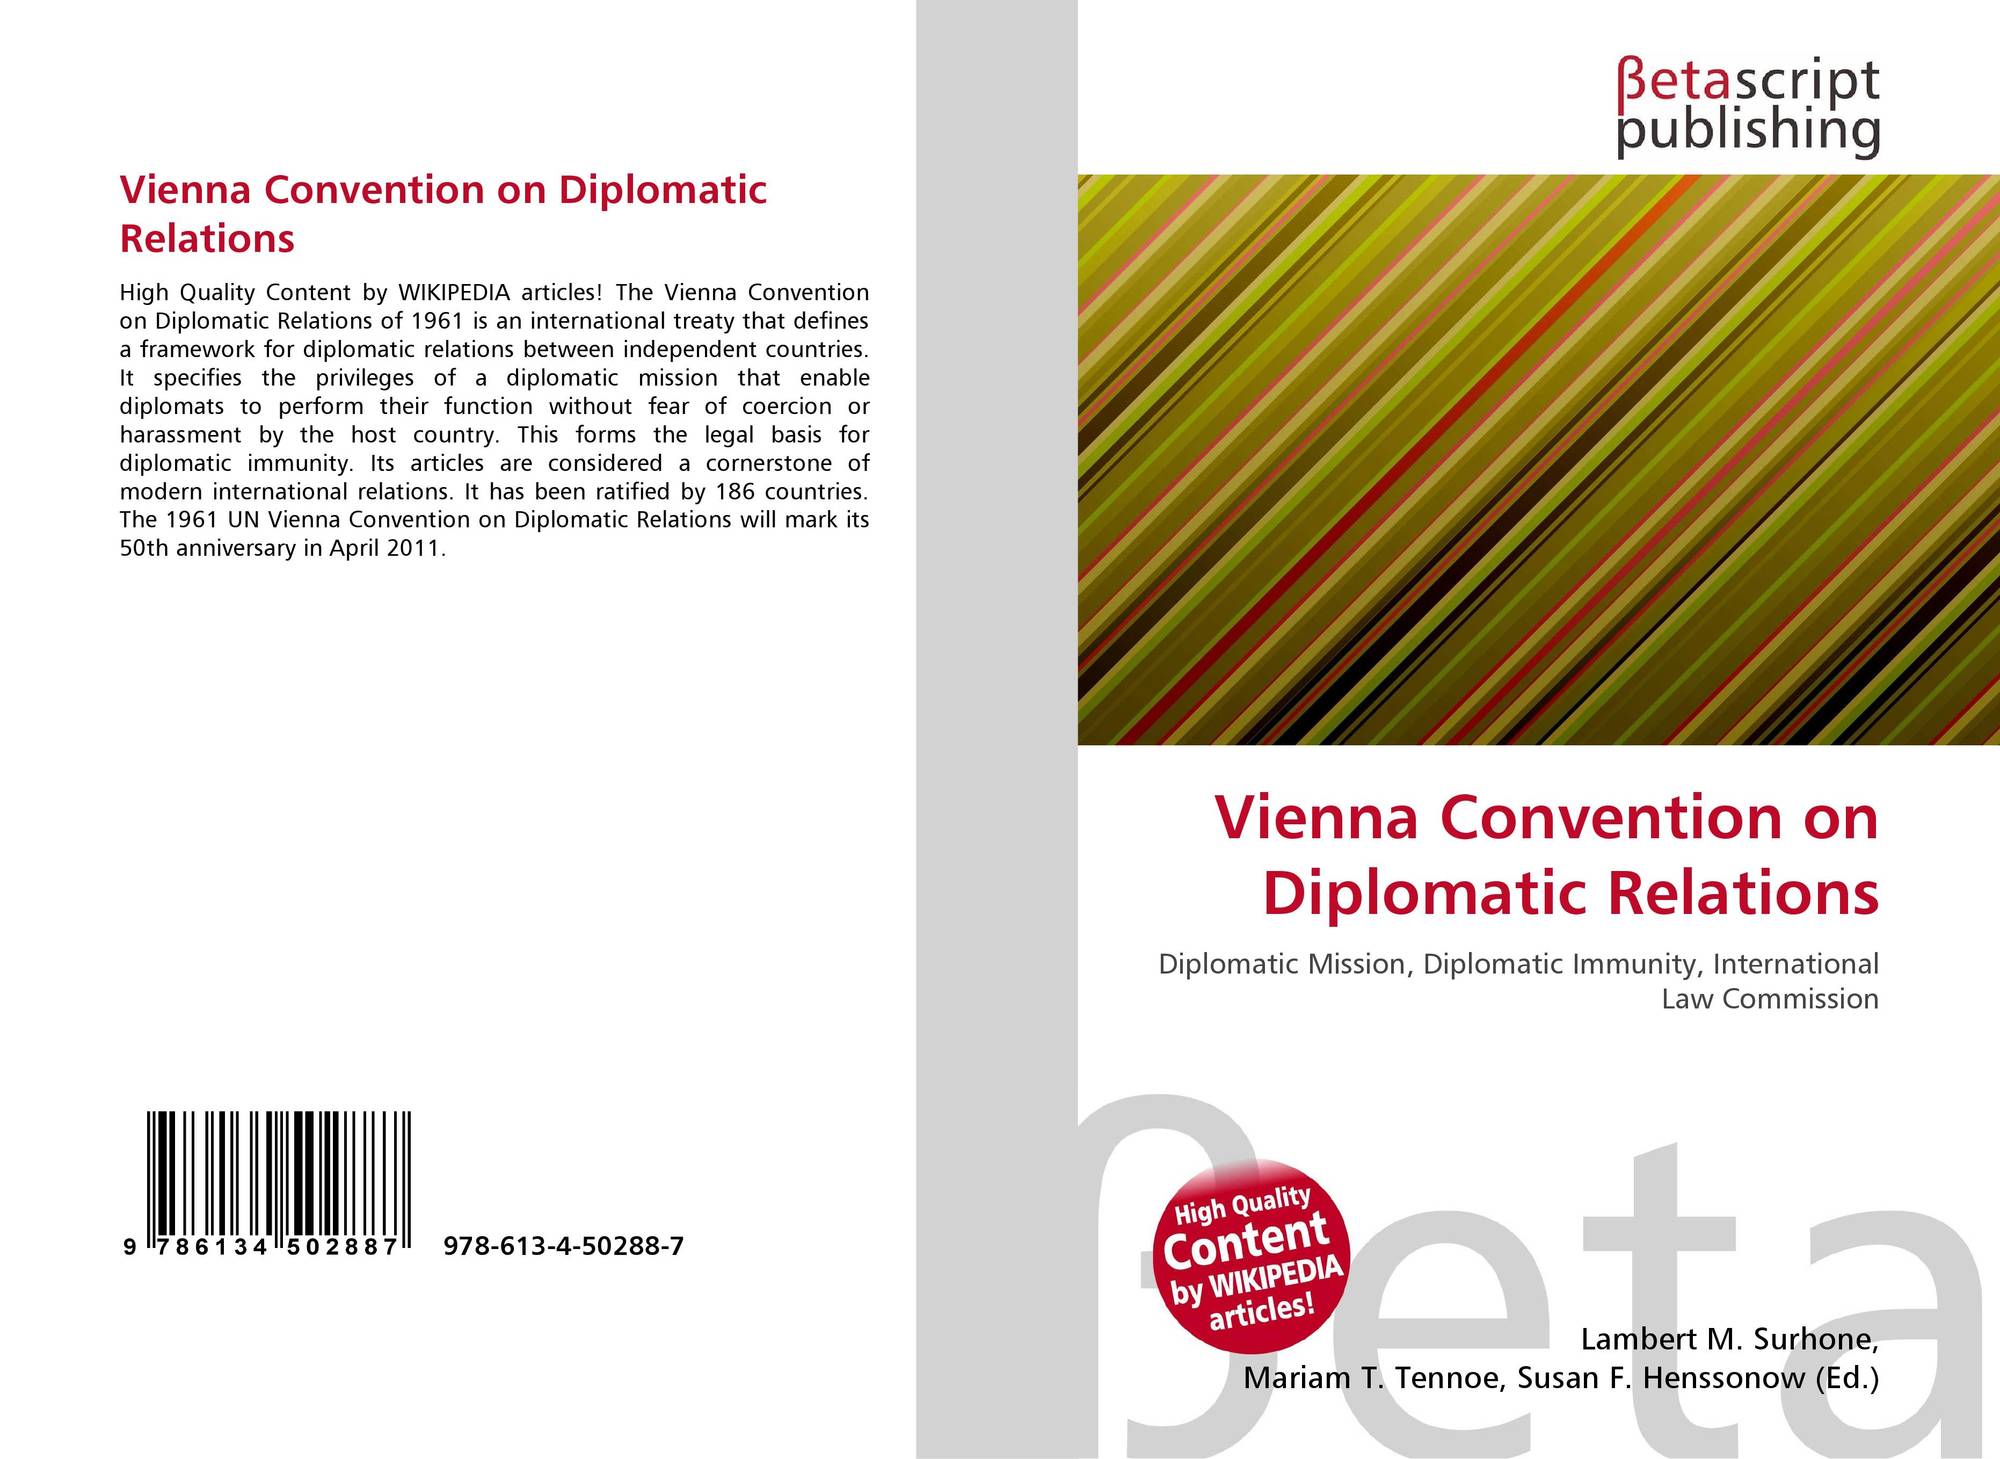 dissertations on vienna convention on diplomatic relations